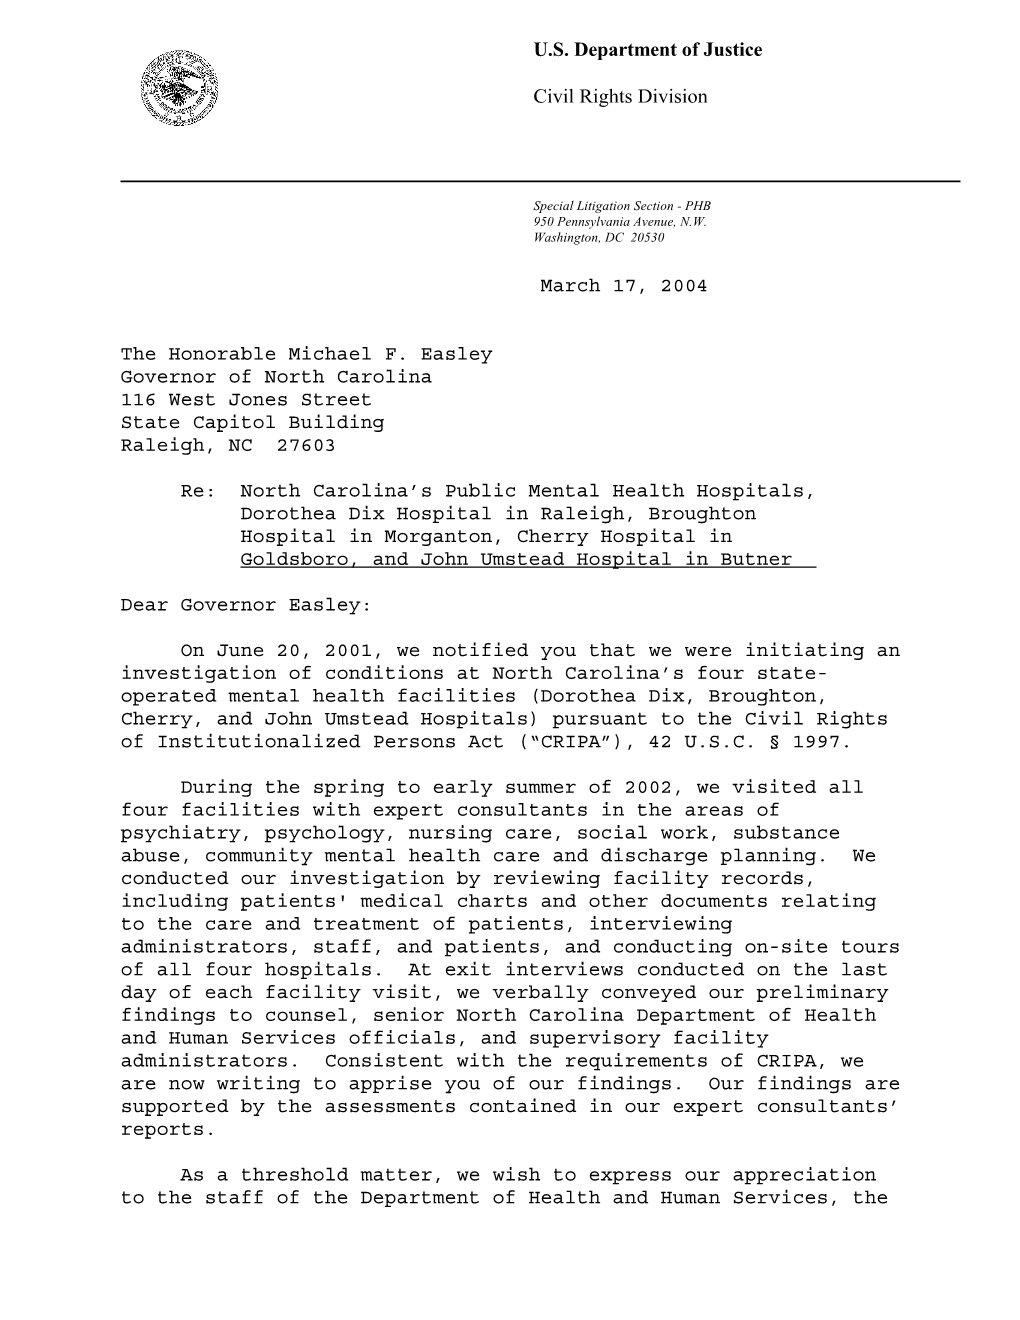 United States Department of Justice, Findings Letter, North Carolinia's